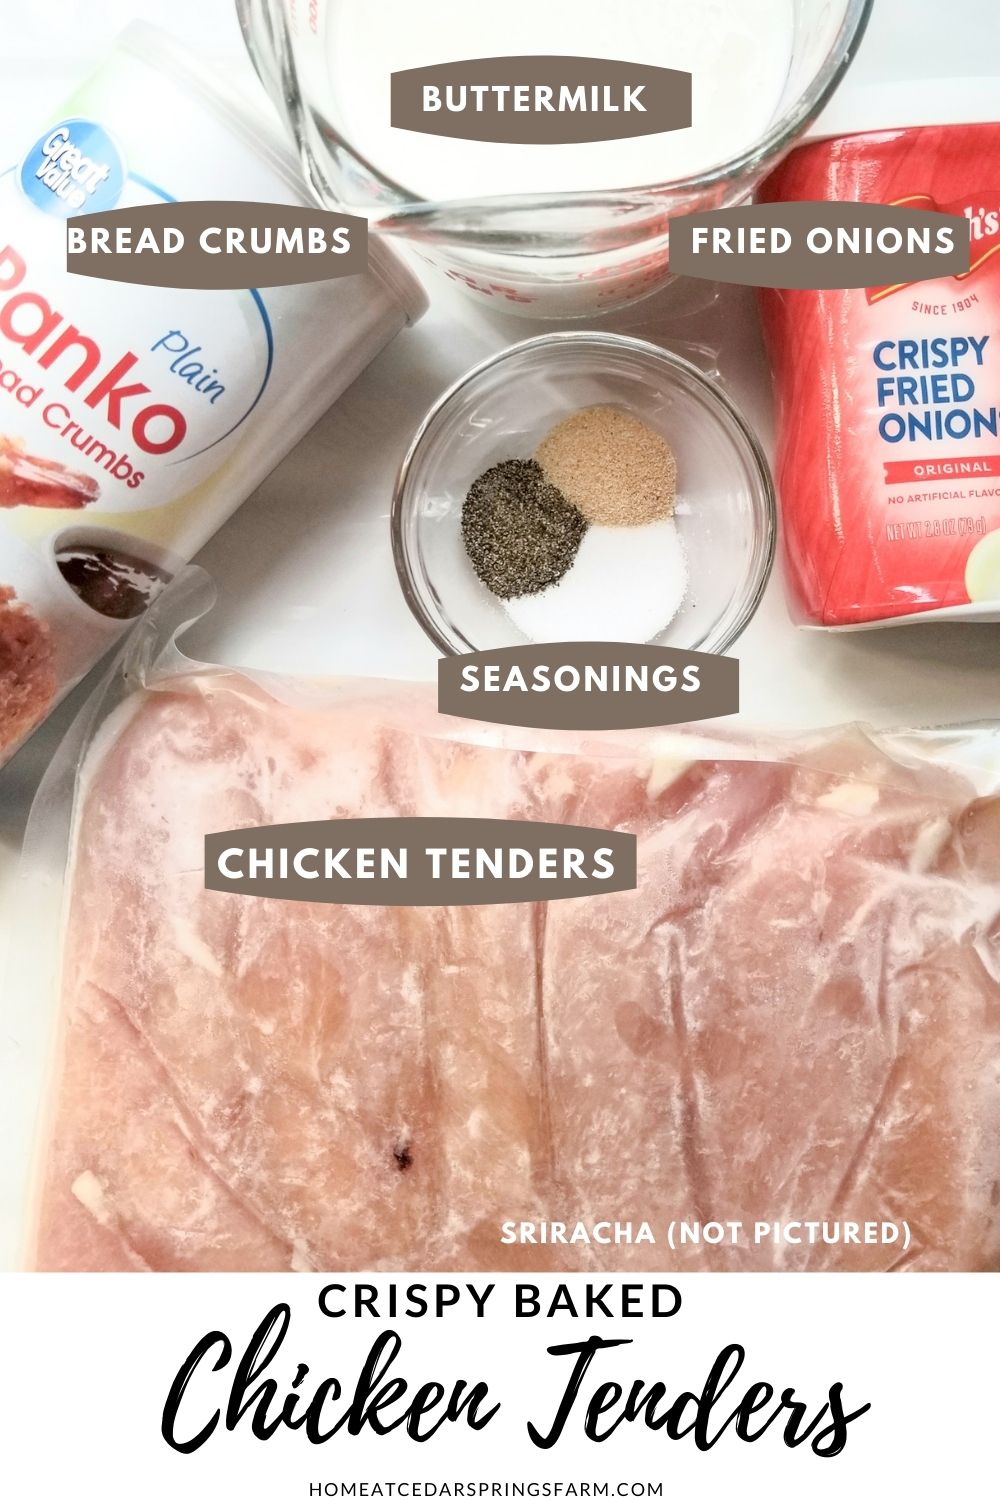 Ingredients picture for breaded chicken tenders